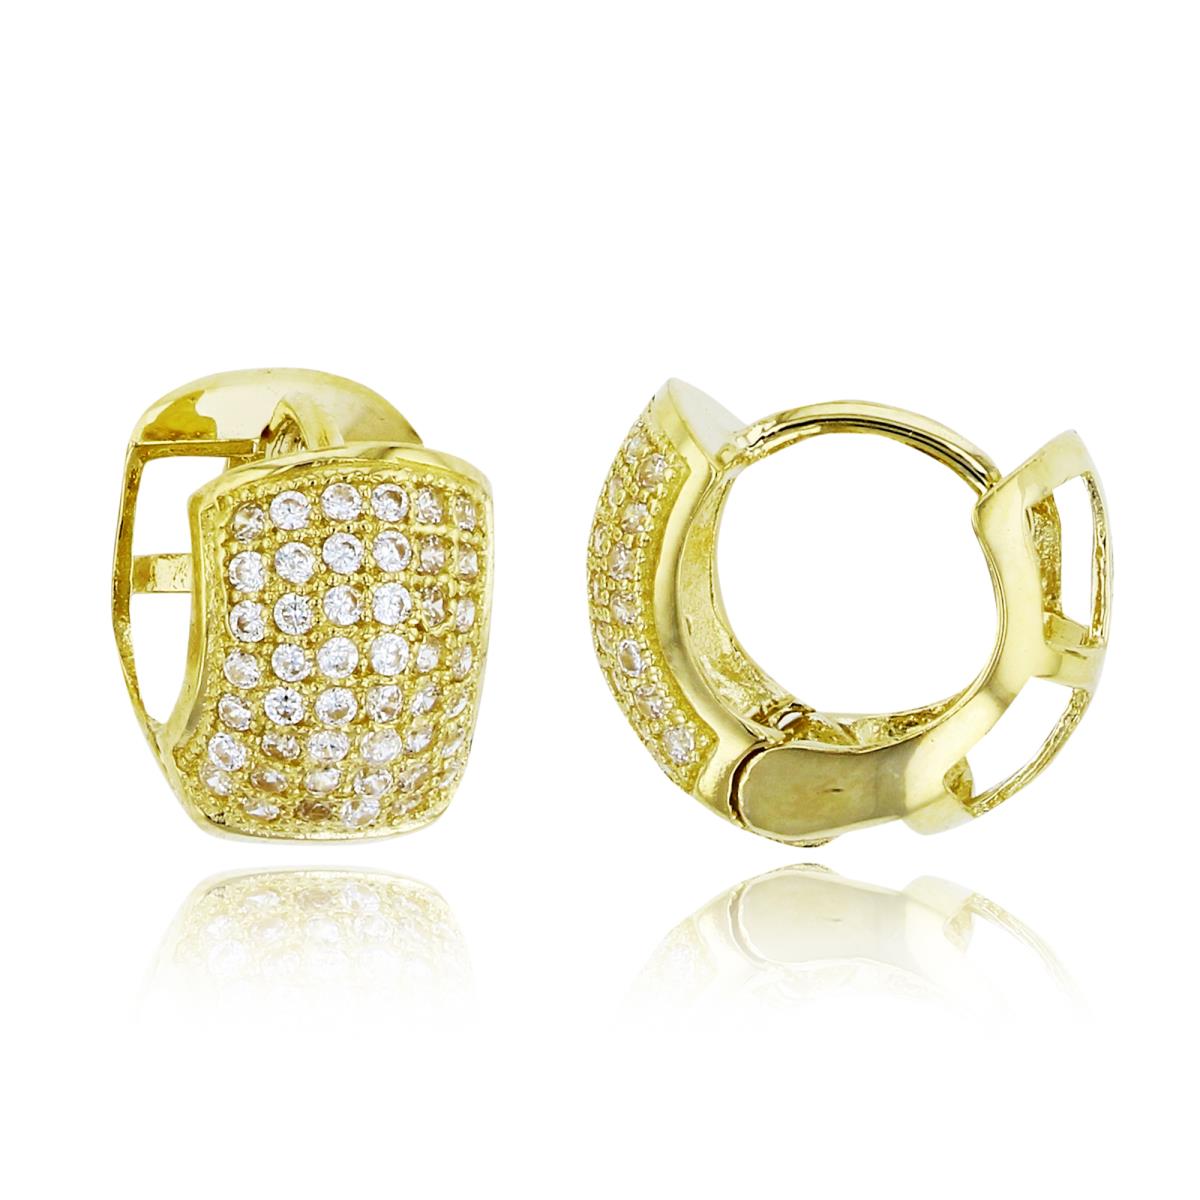 10K Yellow Gold 10x7mm Micropave Puffy Huggie Earring